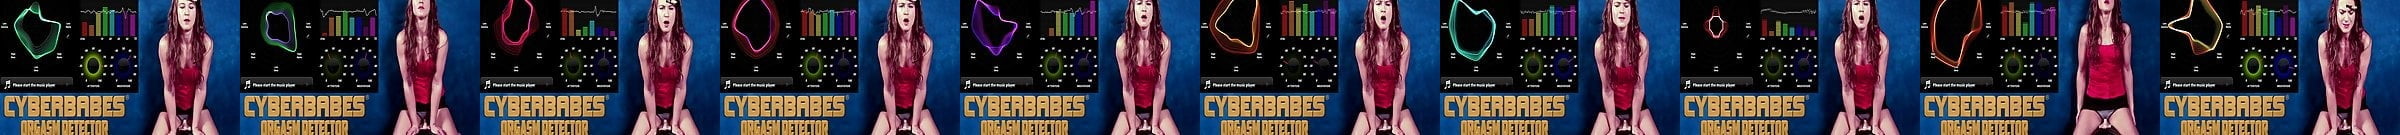 Alessandra Noir Naked Takes Sybian 100 Real Orgasms Xhamster